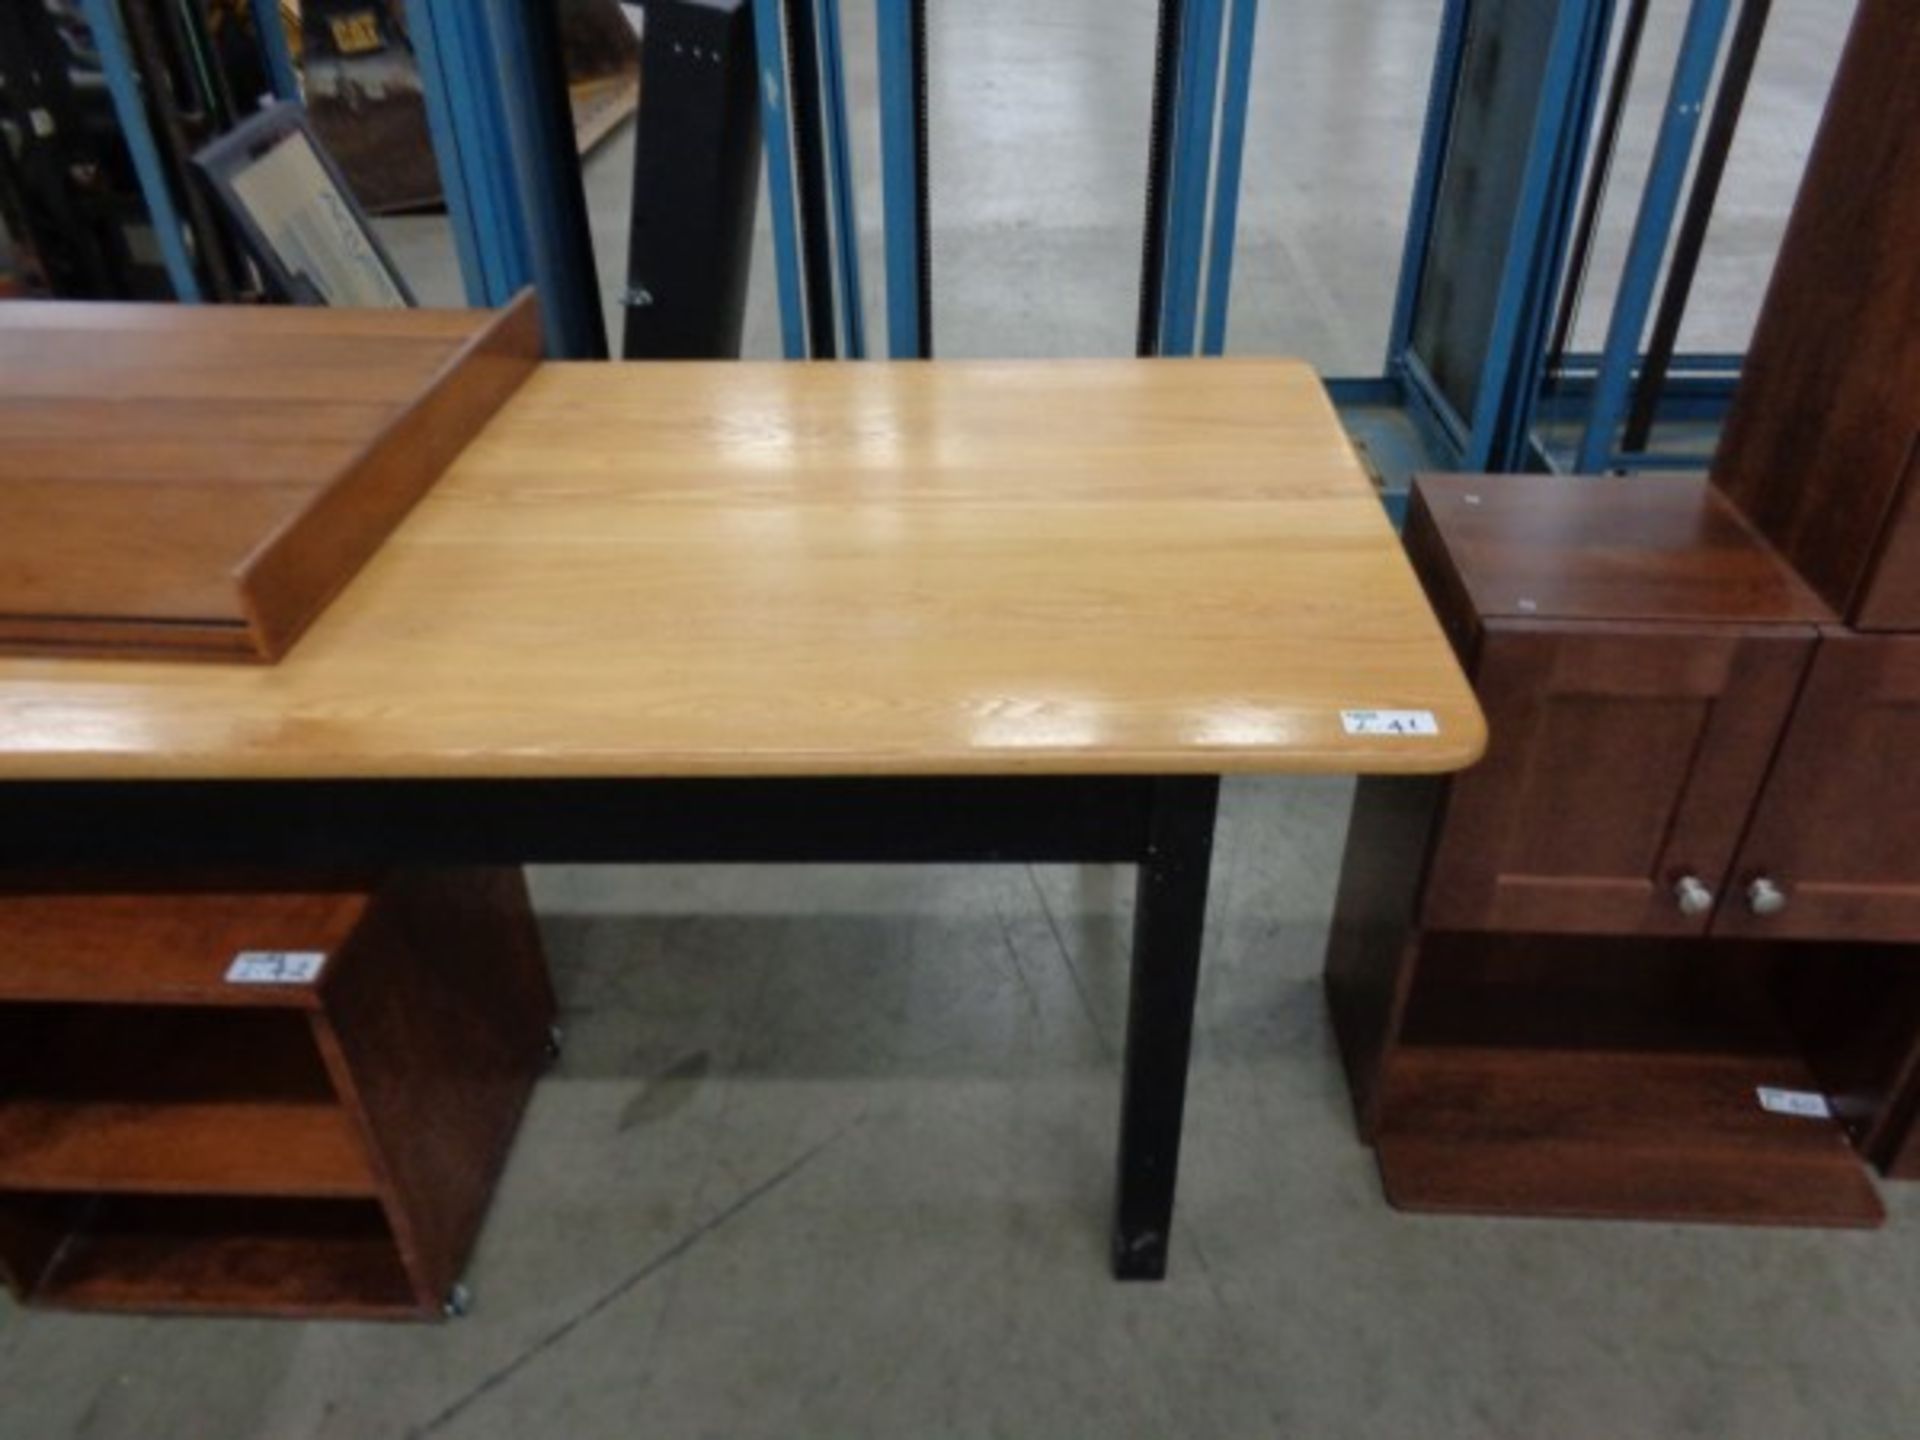 6' X 35" WOODEN TOP TABLE